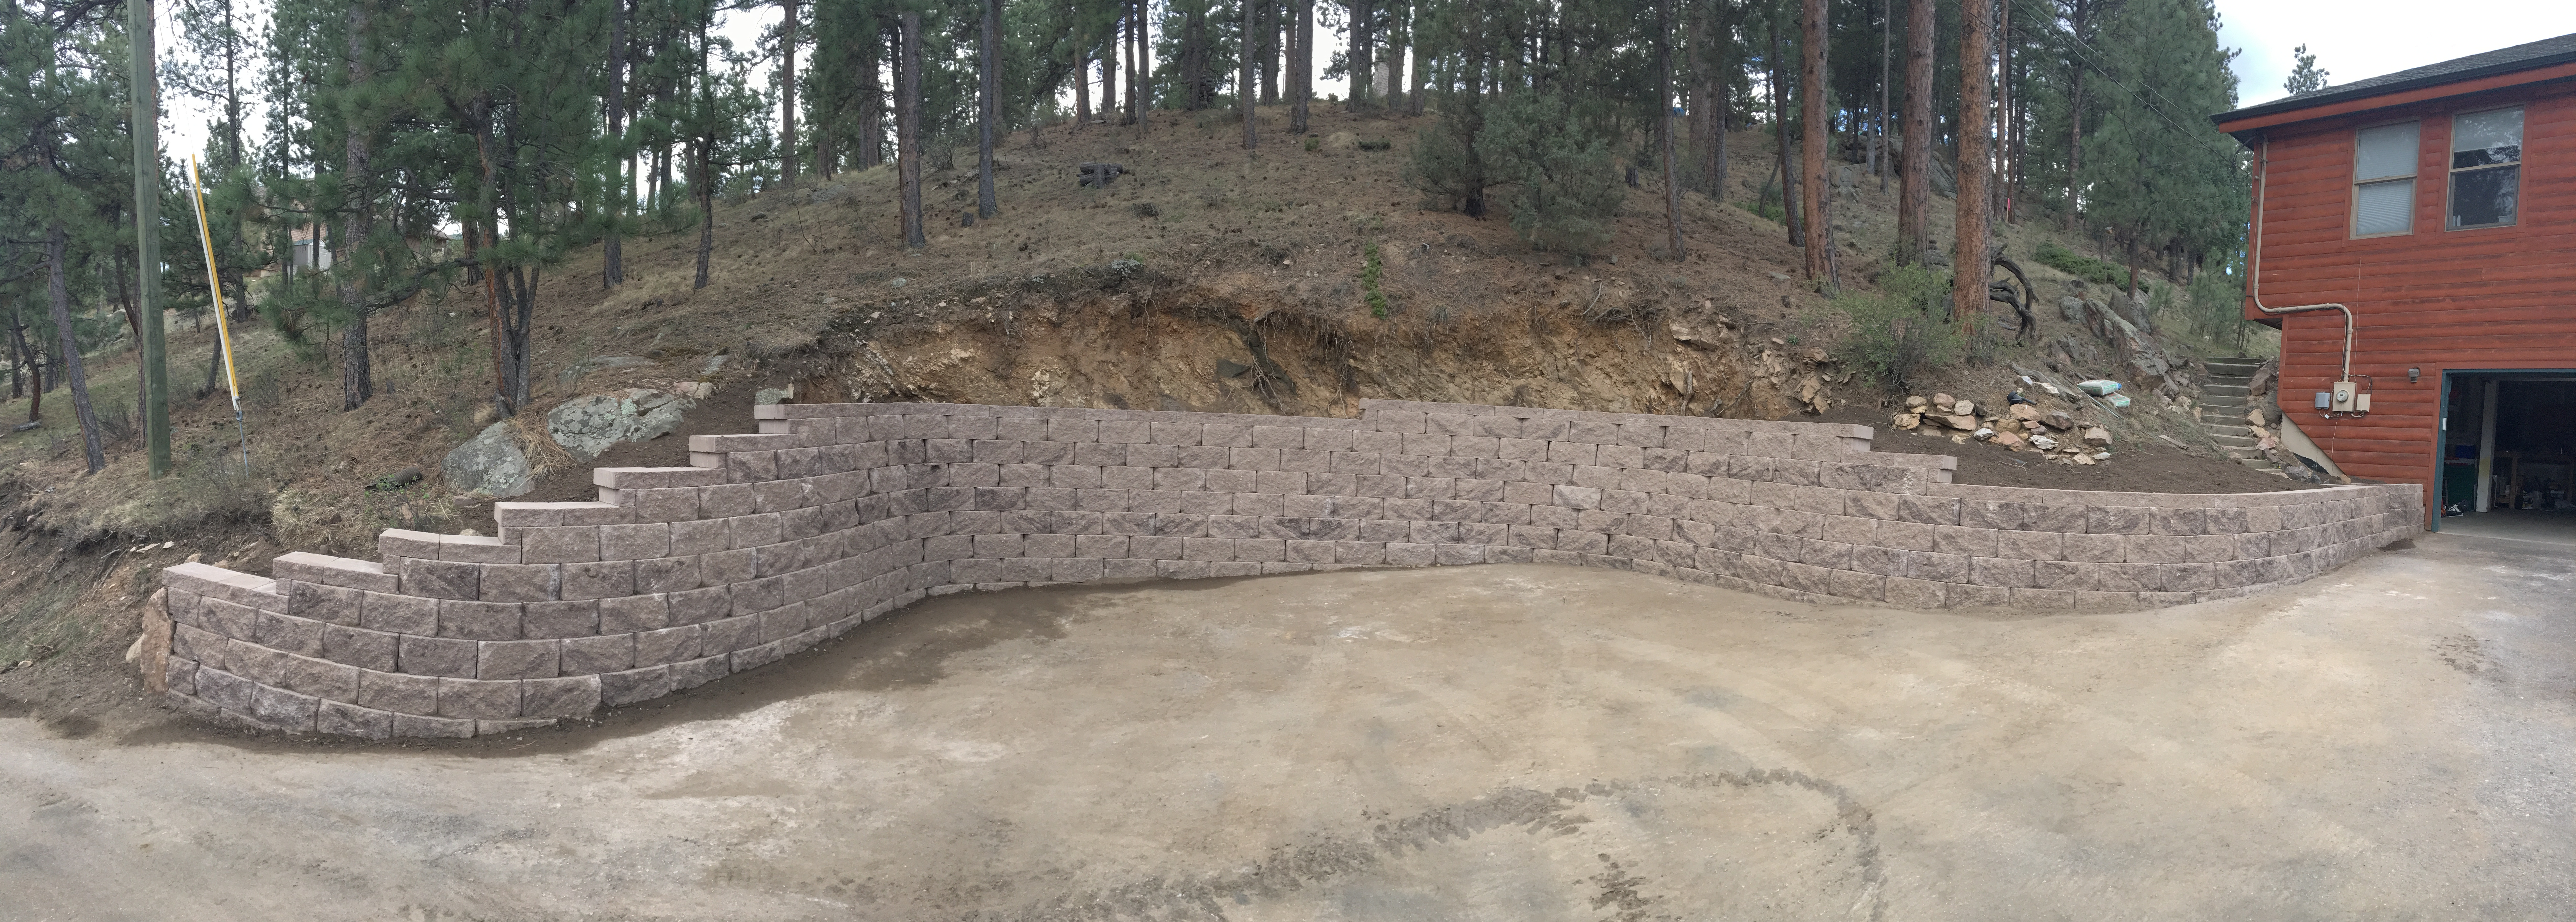 Example of stone retaining wall along driveway and parking area.